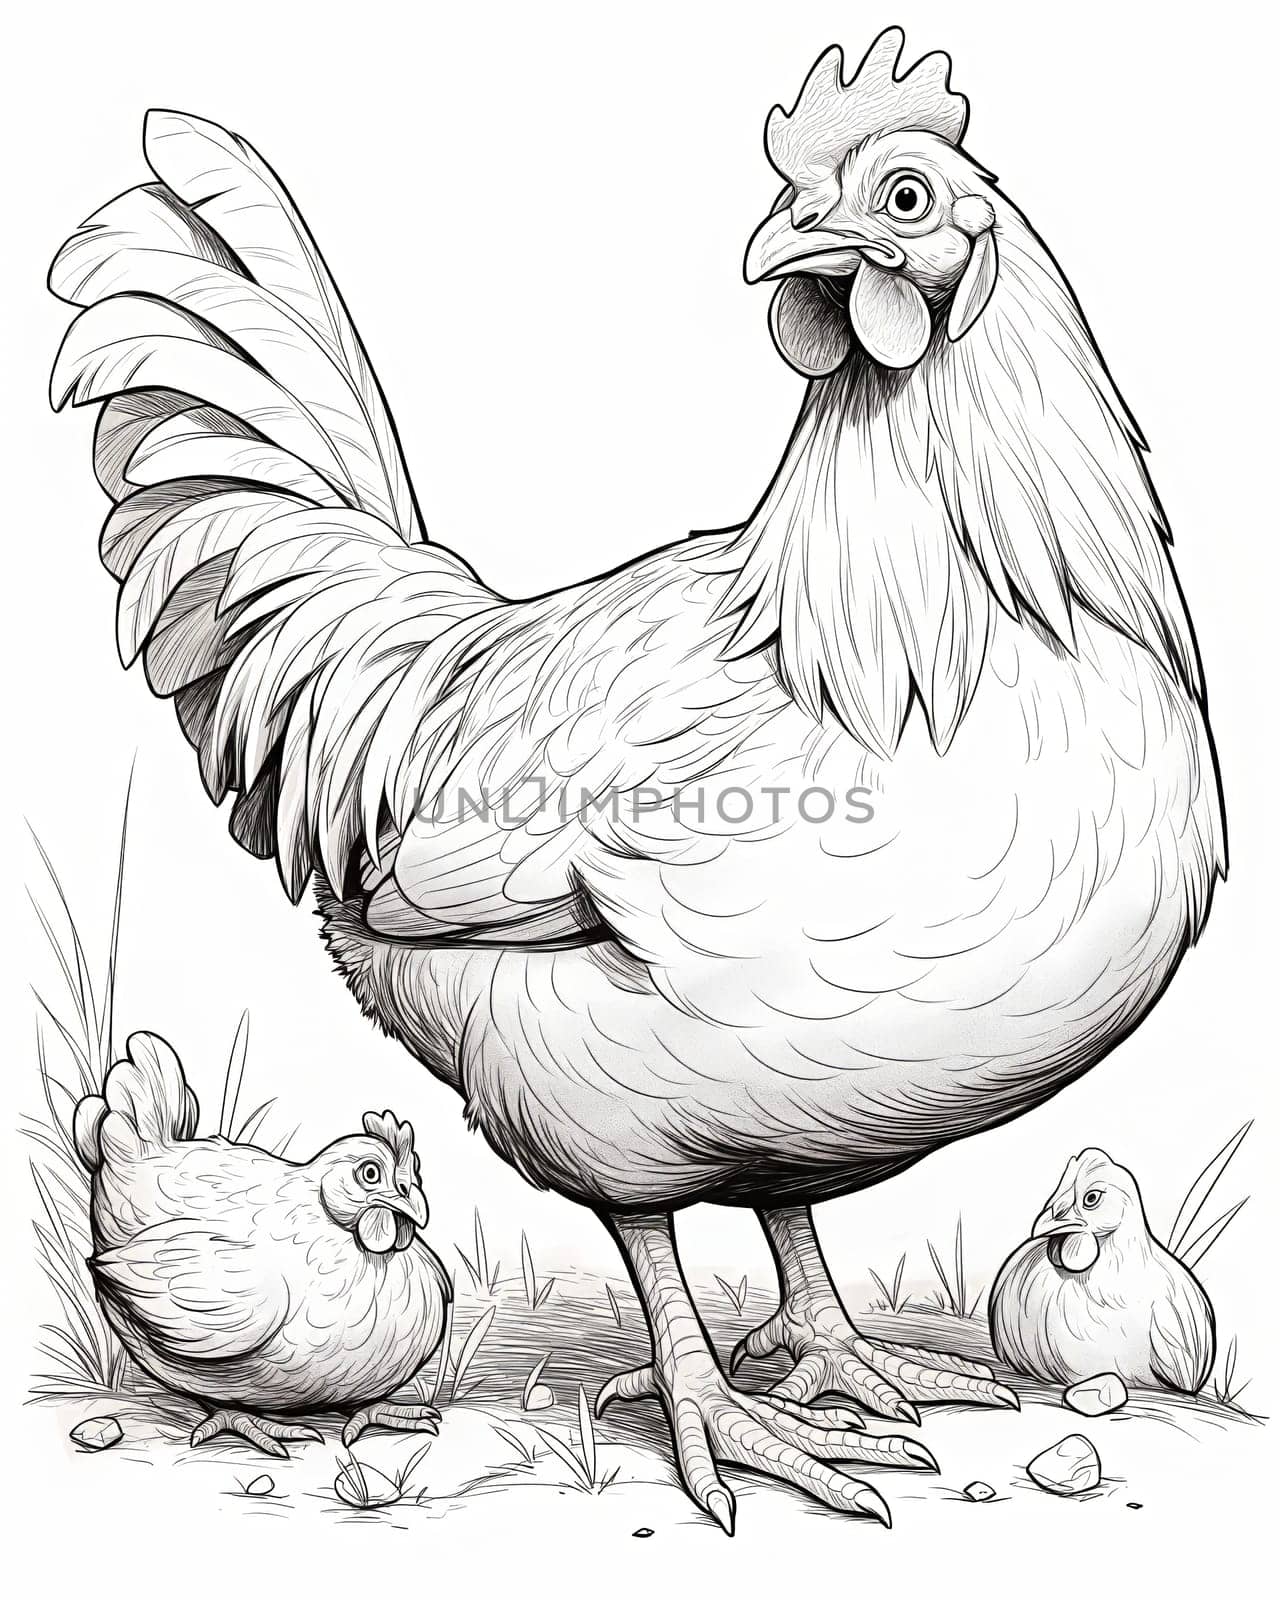 Coloring book for children, coloring birds, chicken. by Fischeron